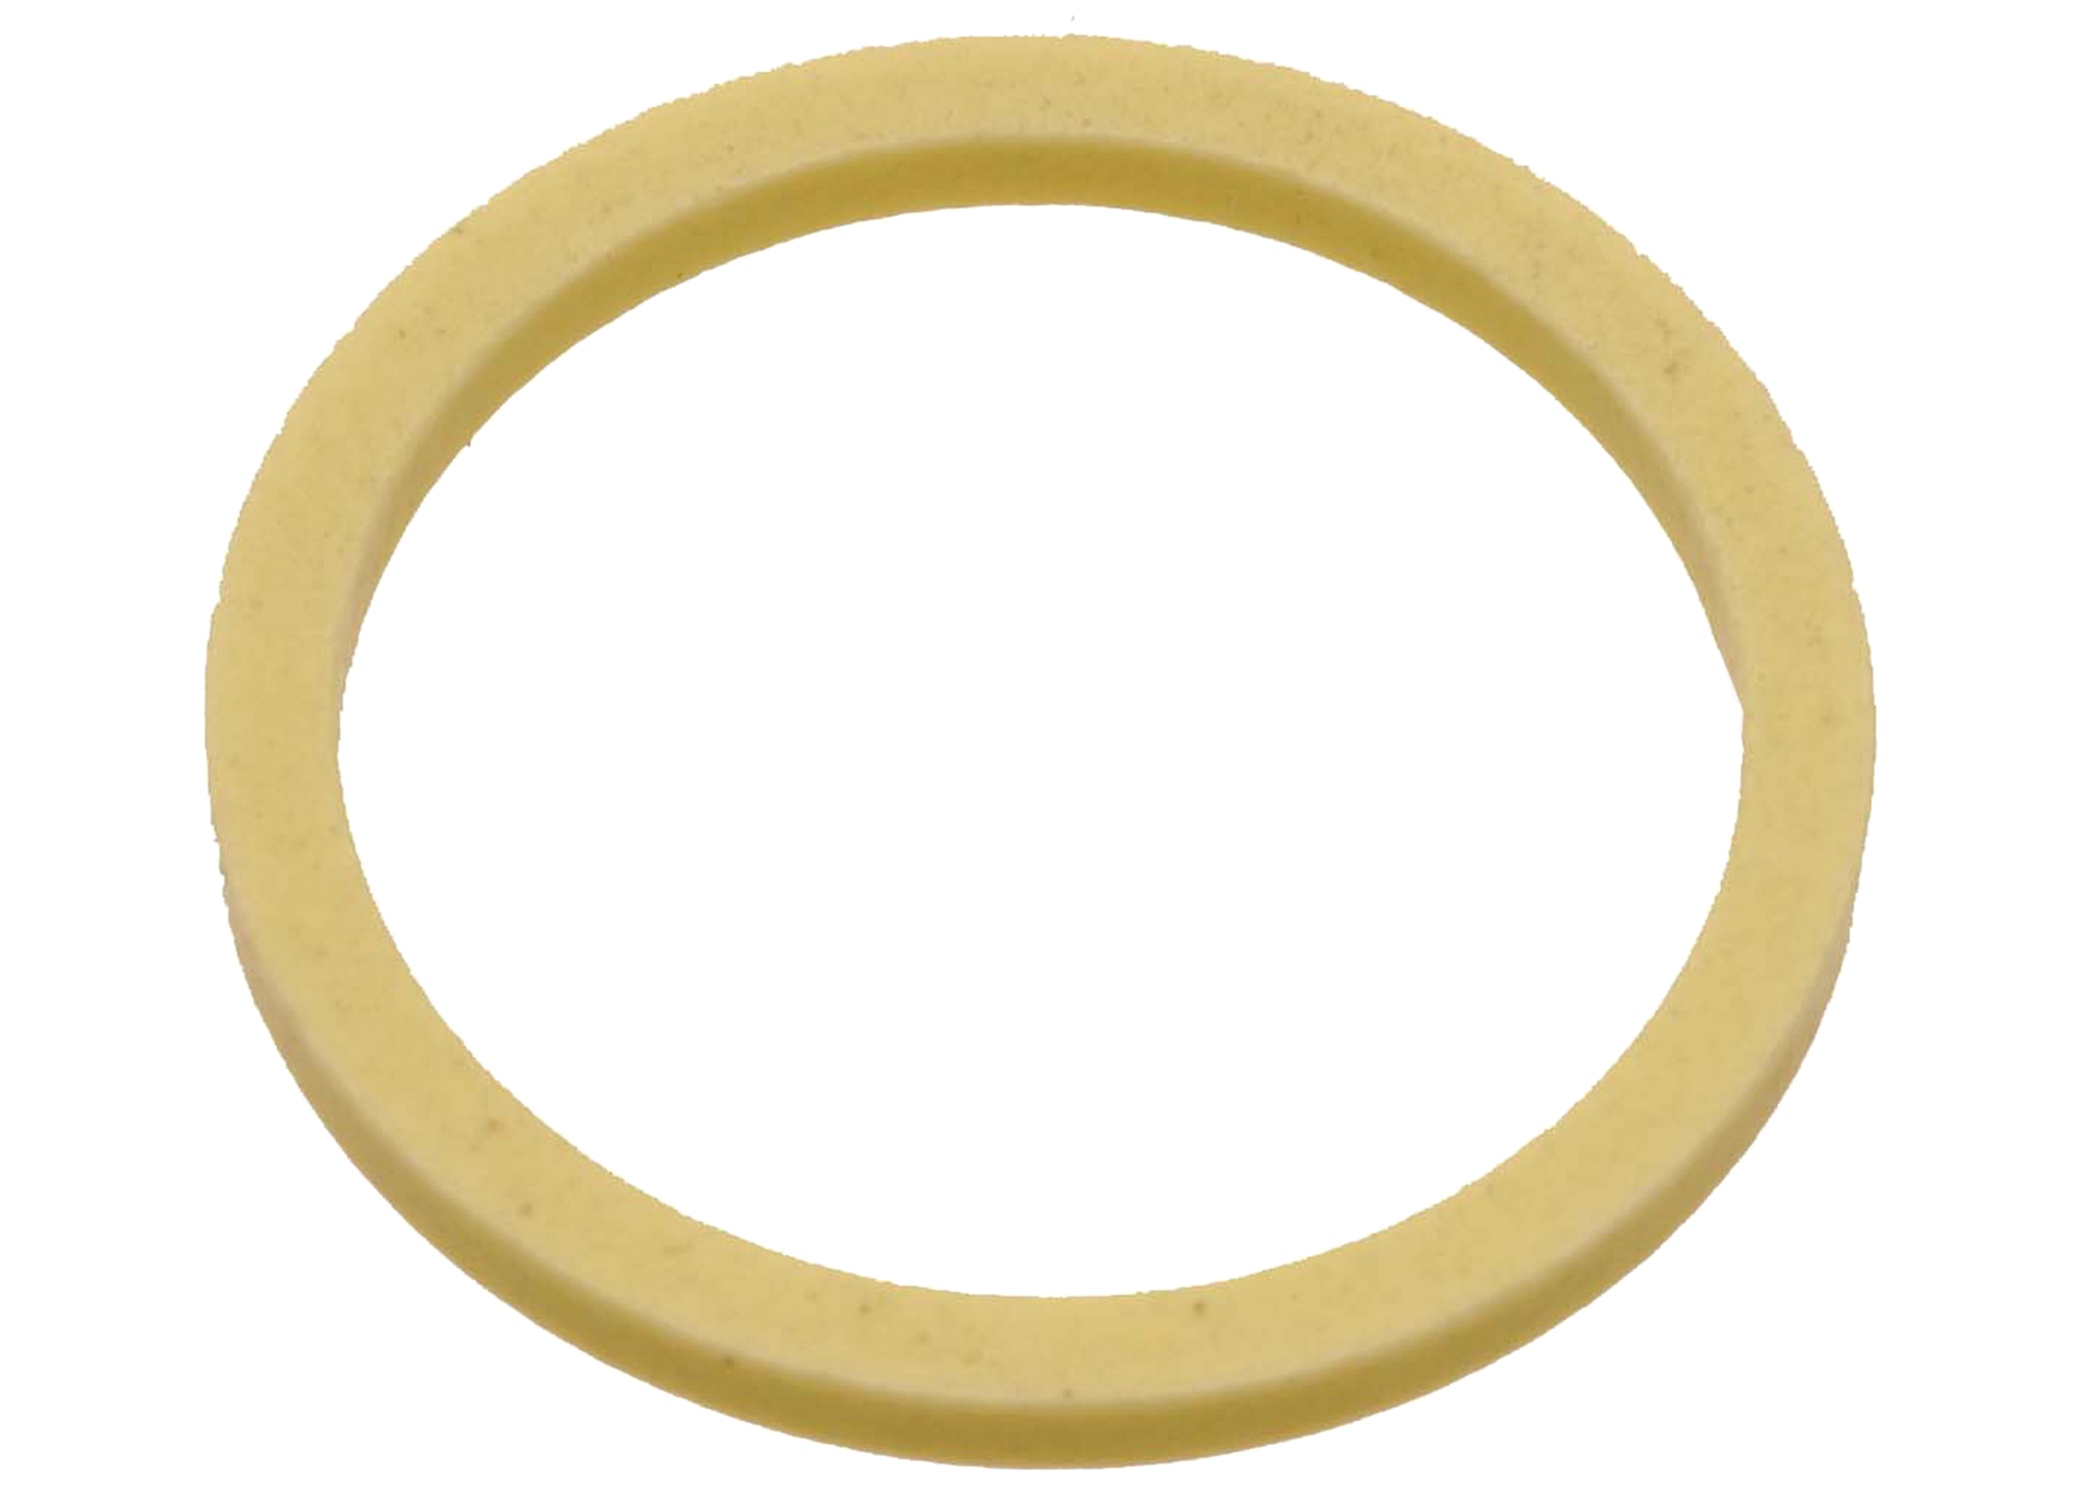 GM GENUINE PARTS - Automatic Transmission Turbine Shaft Fluid Seal Ring - GMP 24208978